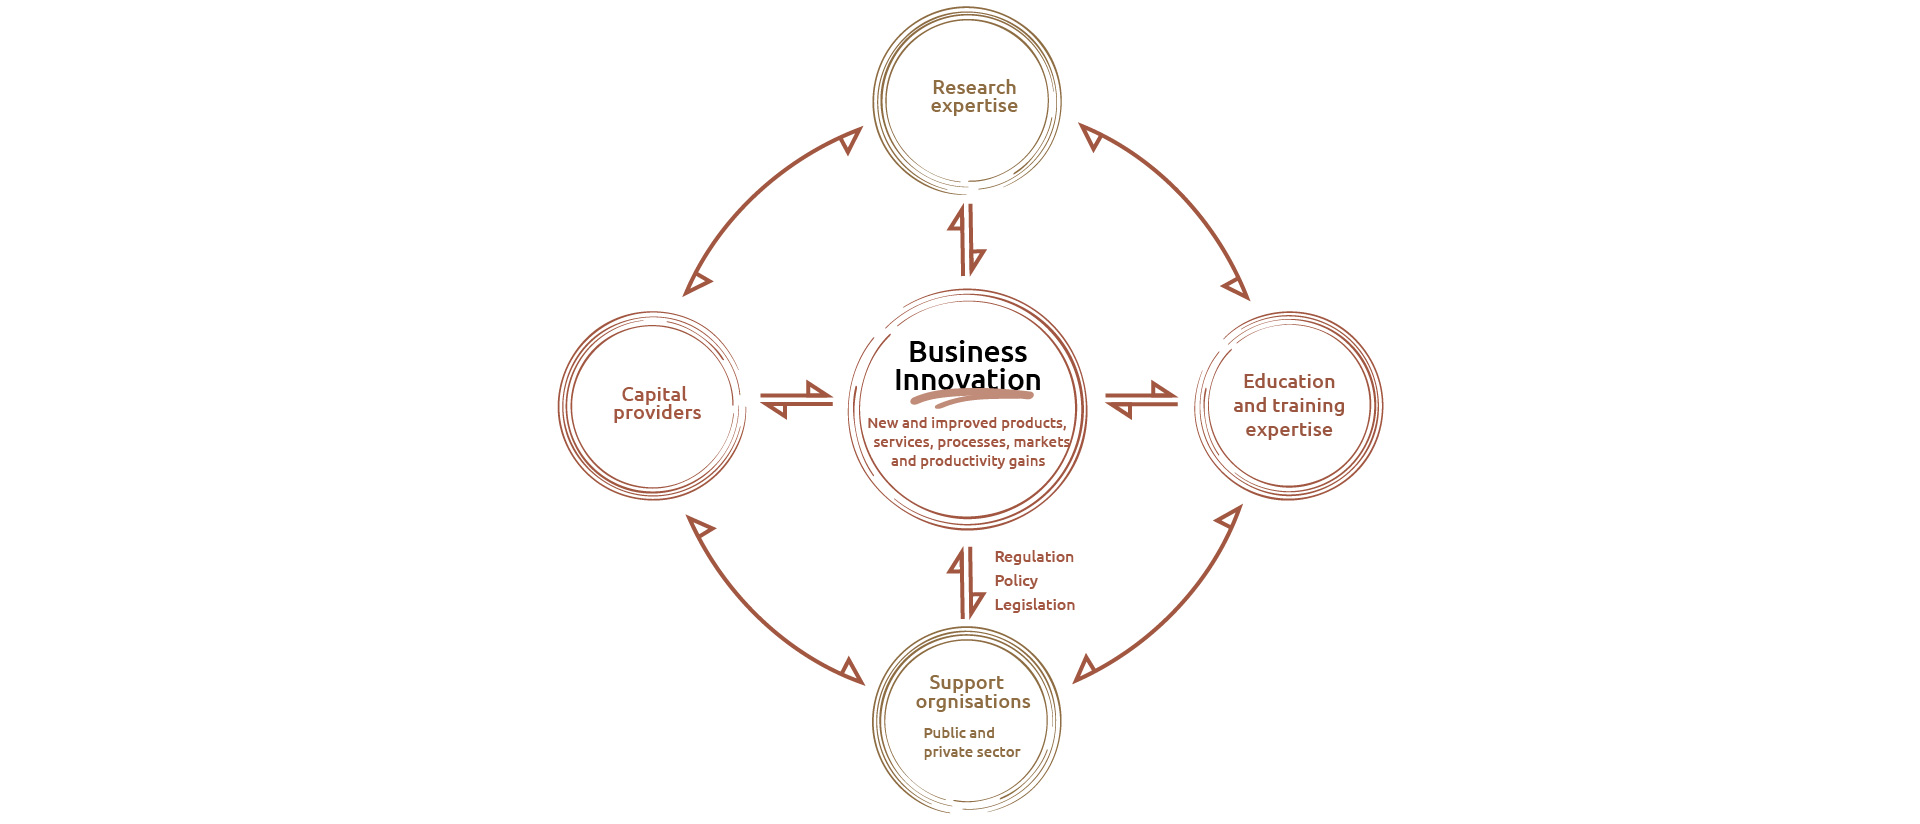 A visual showing the environment that is required to support and encourage business innovation. Business innovation includes the development of new and improved products, services, processes and markets and delivering gains in productivity.